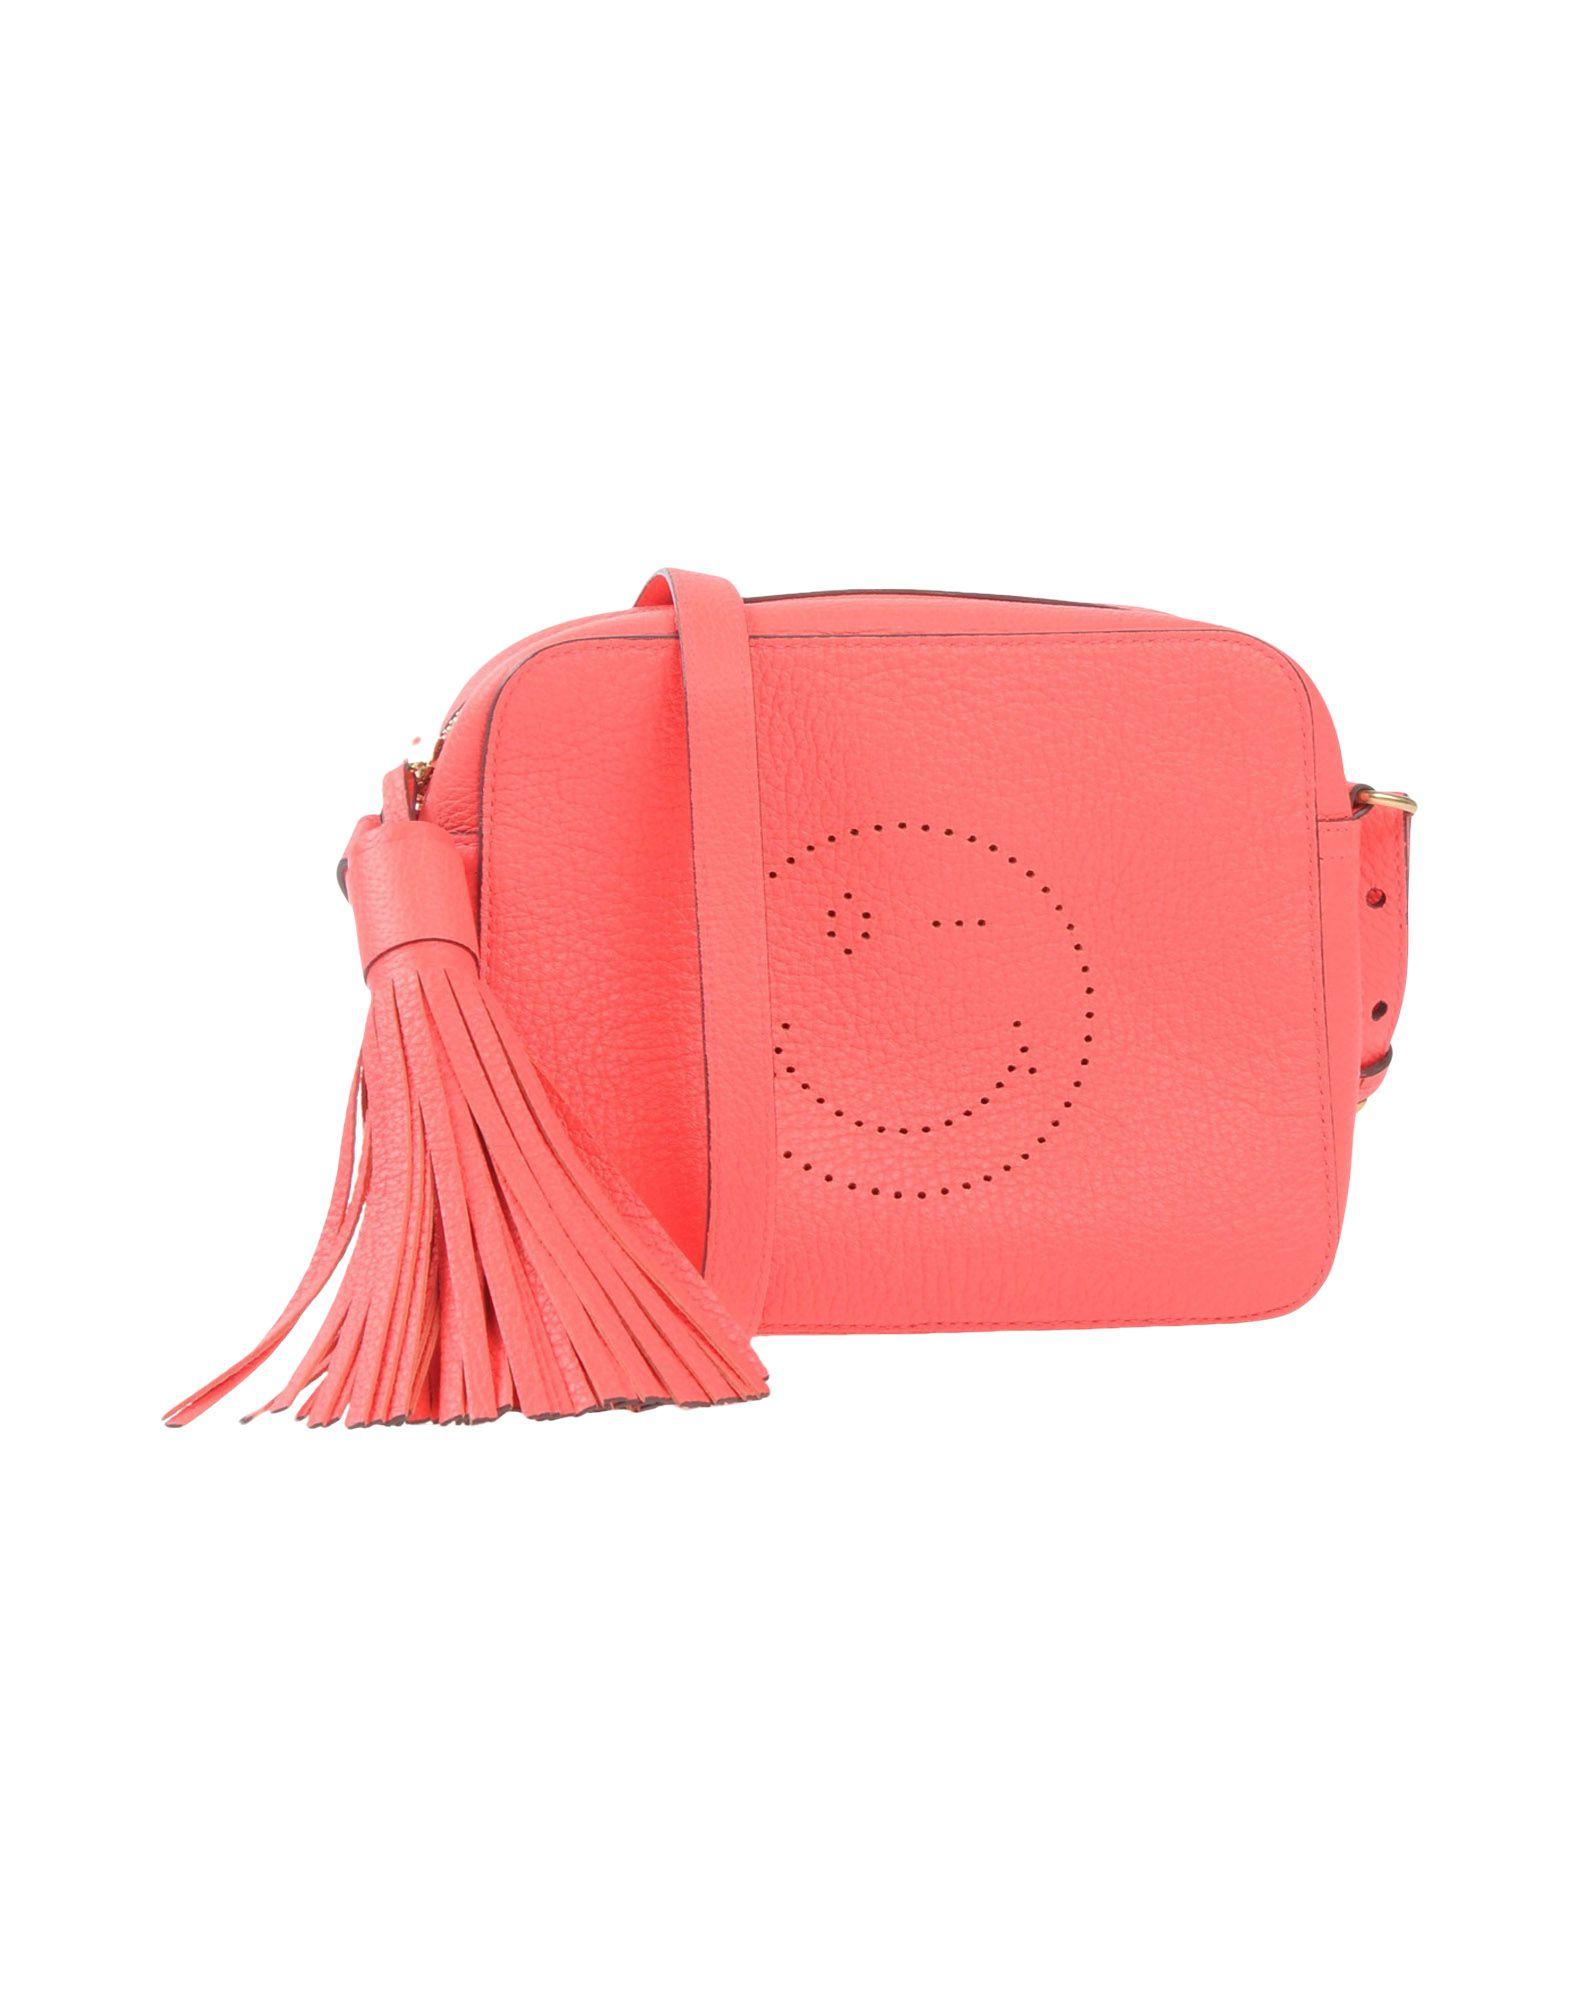 Anya Hindmarch In Coral | ModeSens